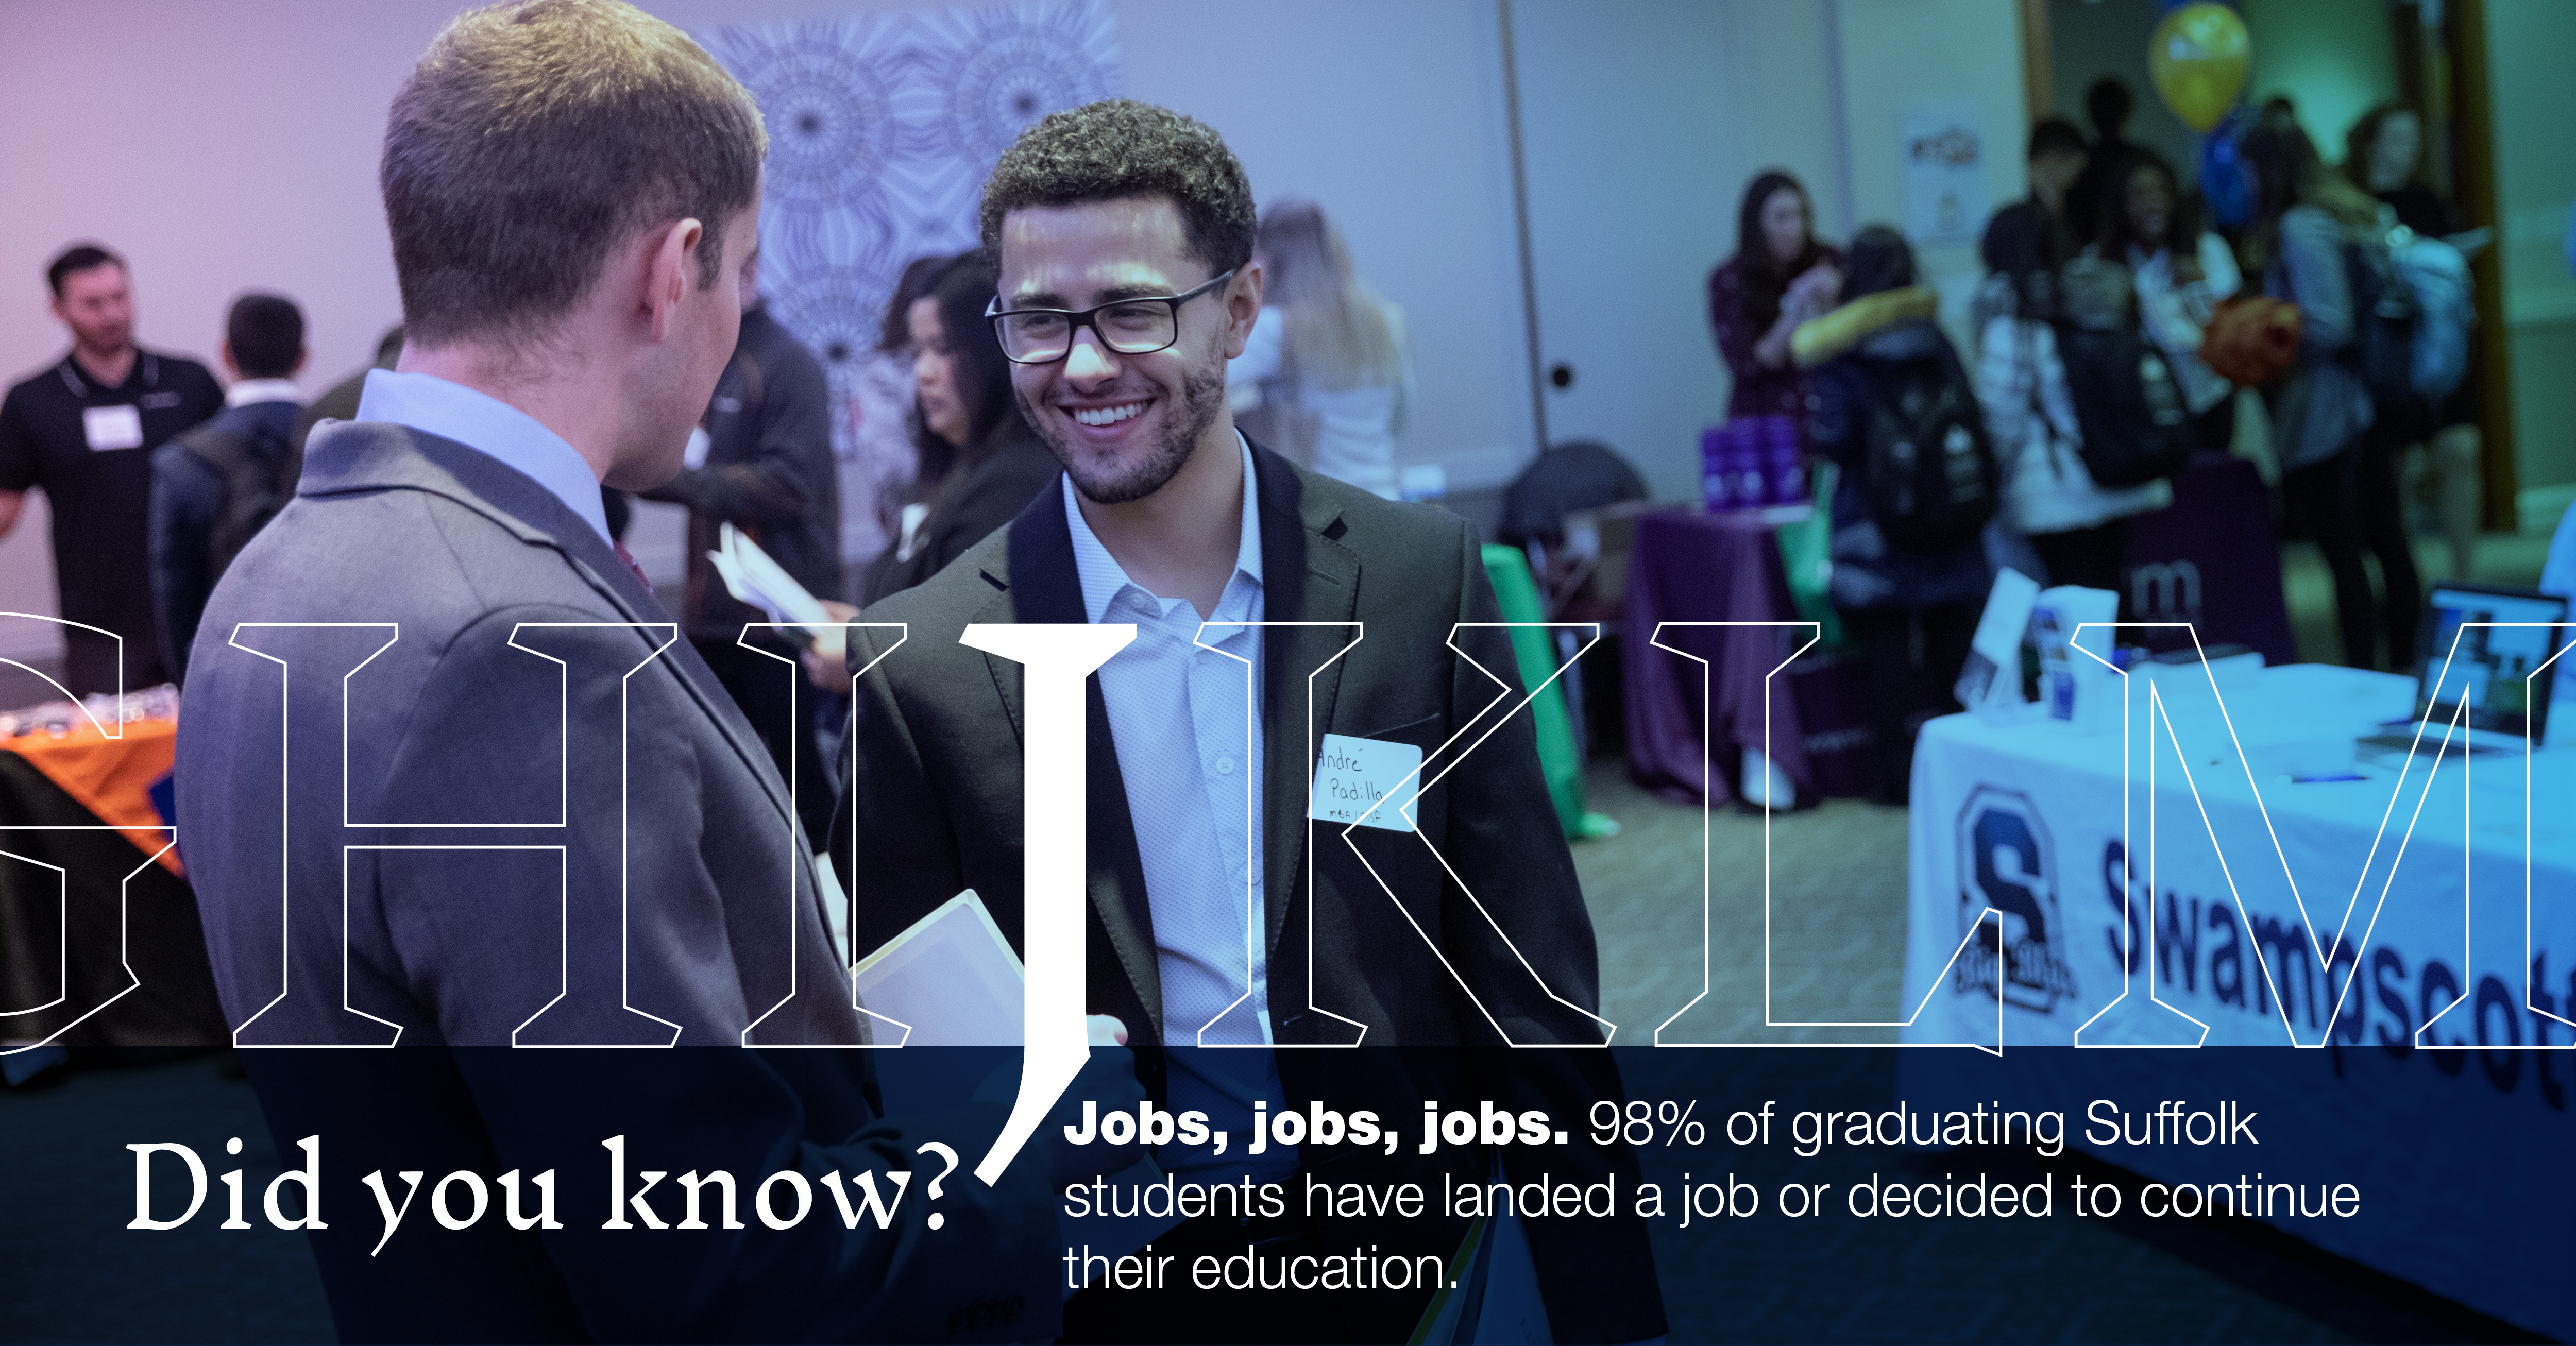 J: [image of students chatting at a job fair] Did you know that 98% of Suffolk graduates have landed a job or decided to continue their education?